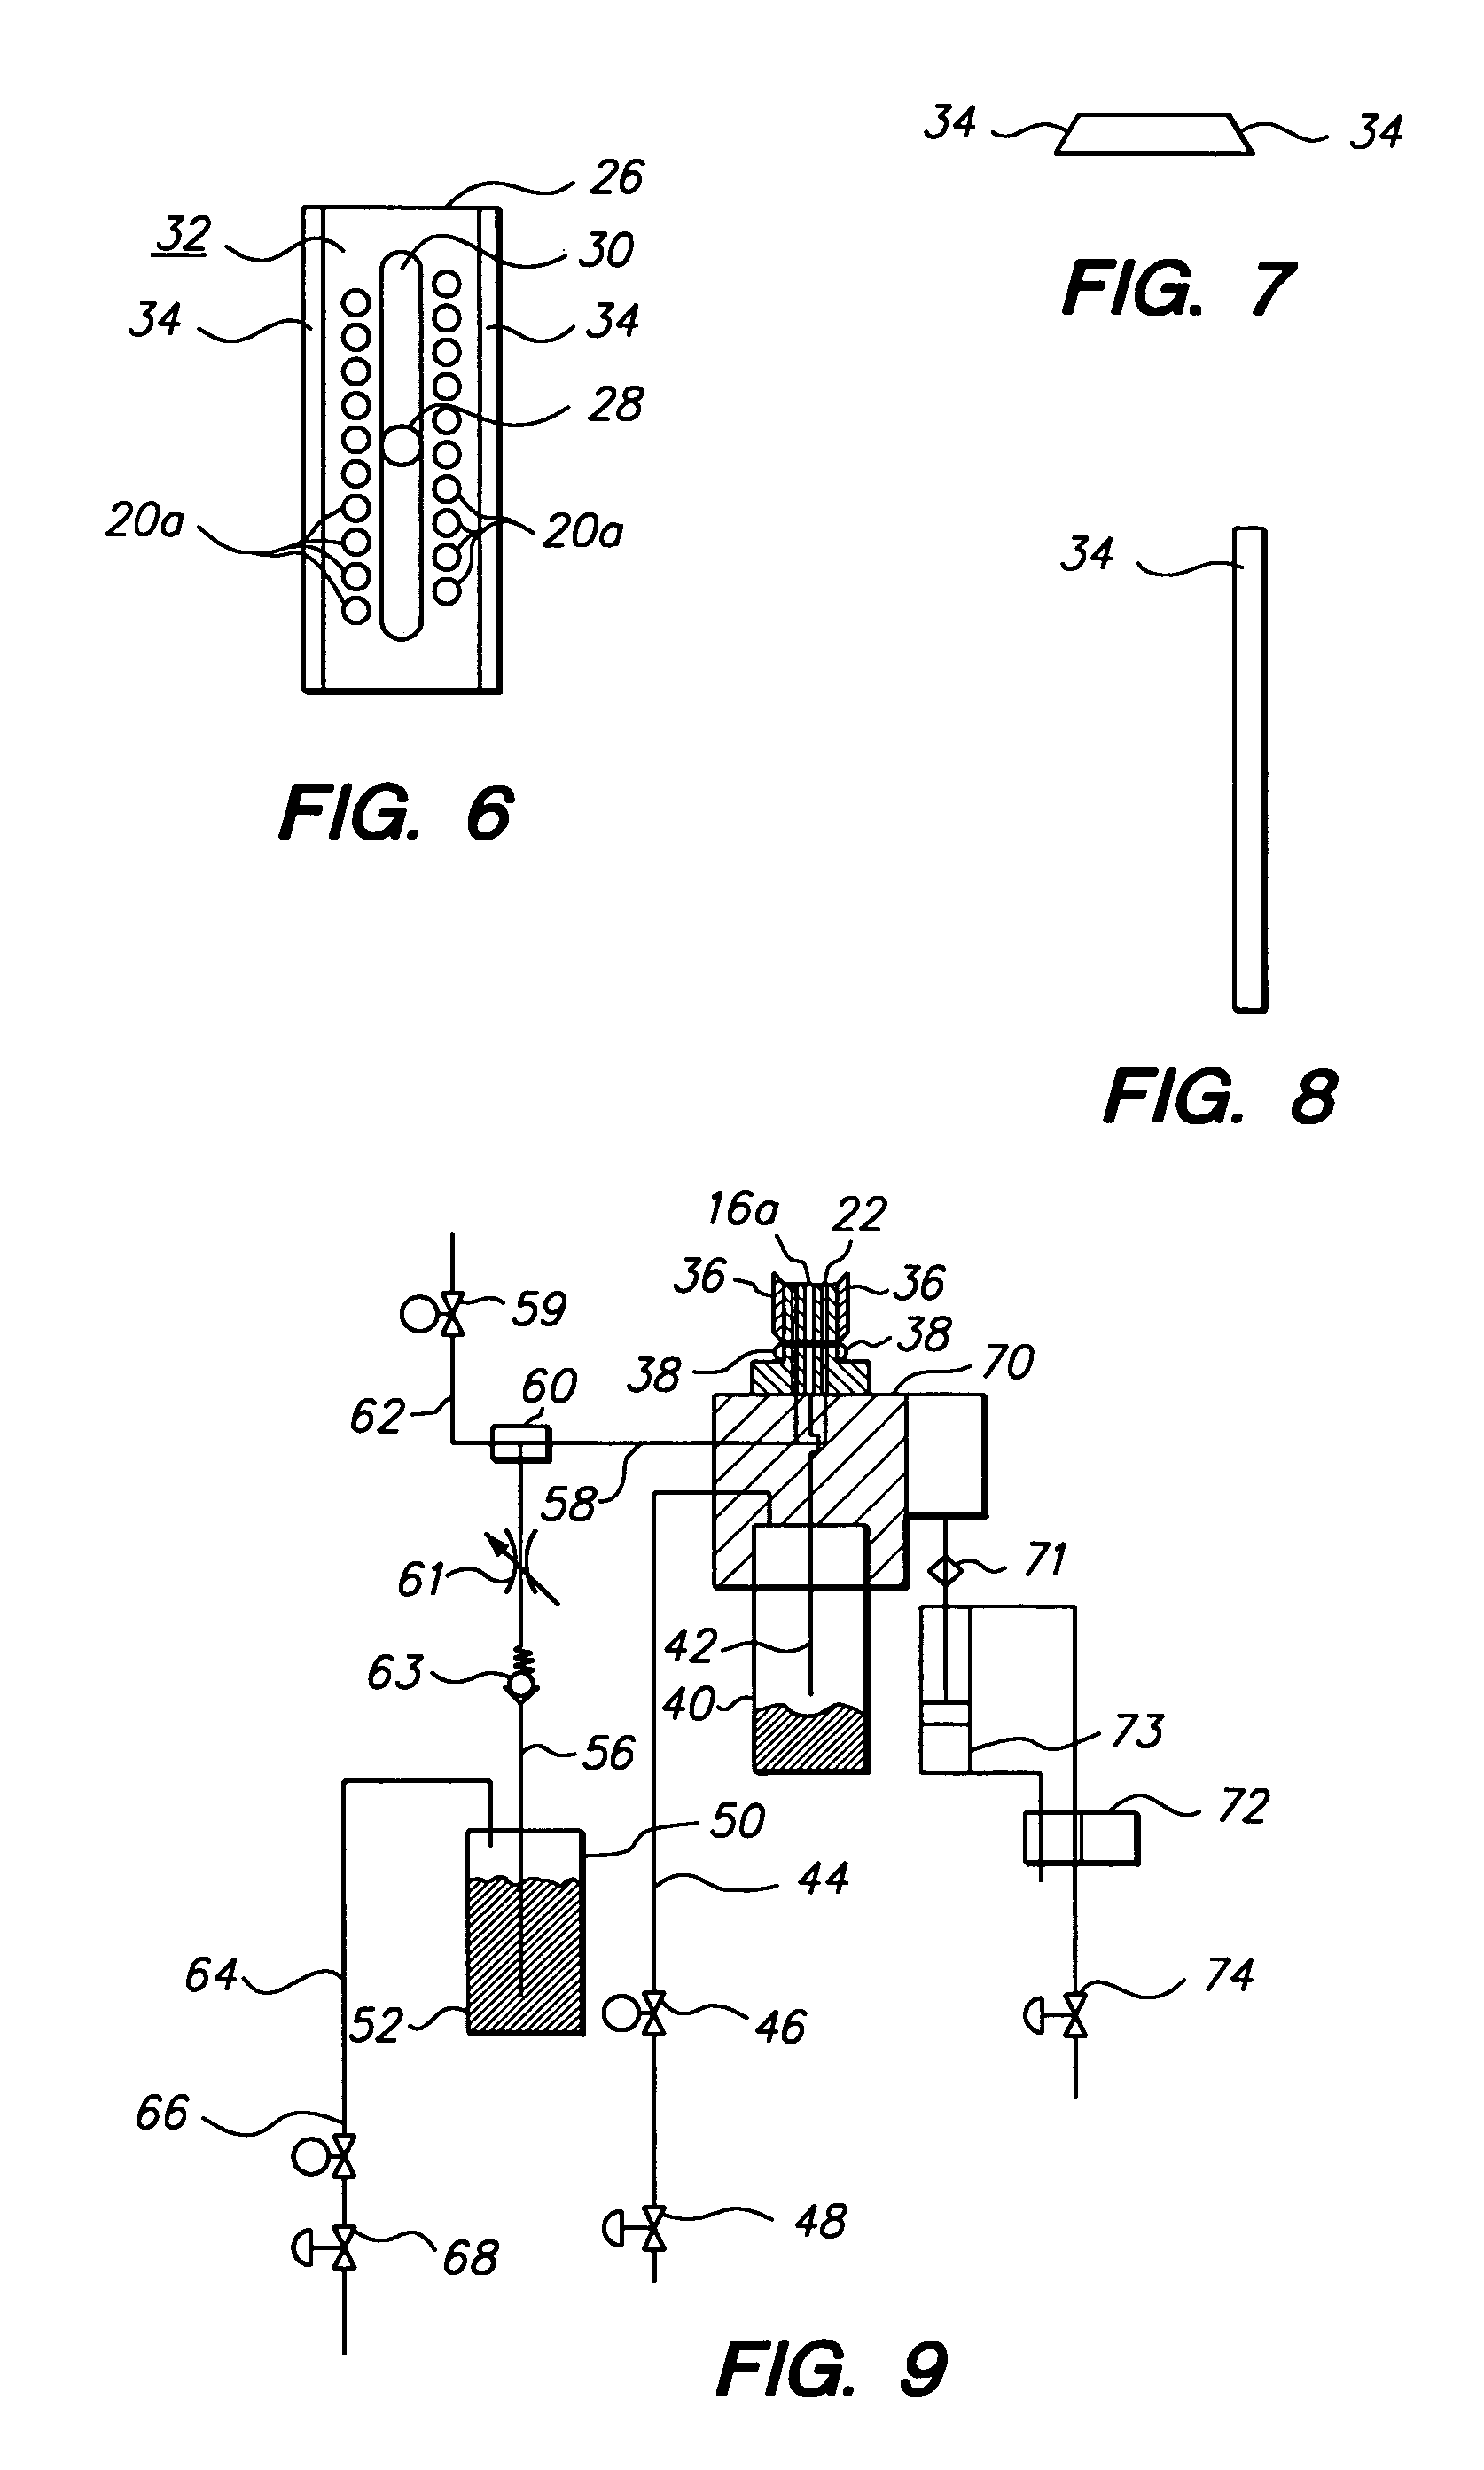 Apparatus and methods for cleaning and priming droplet dispensing devices